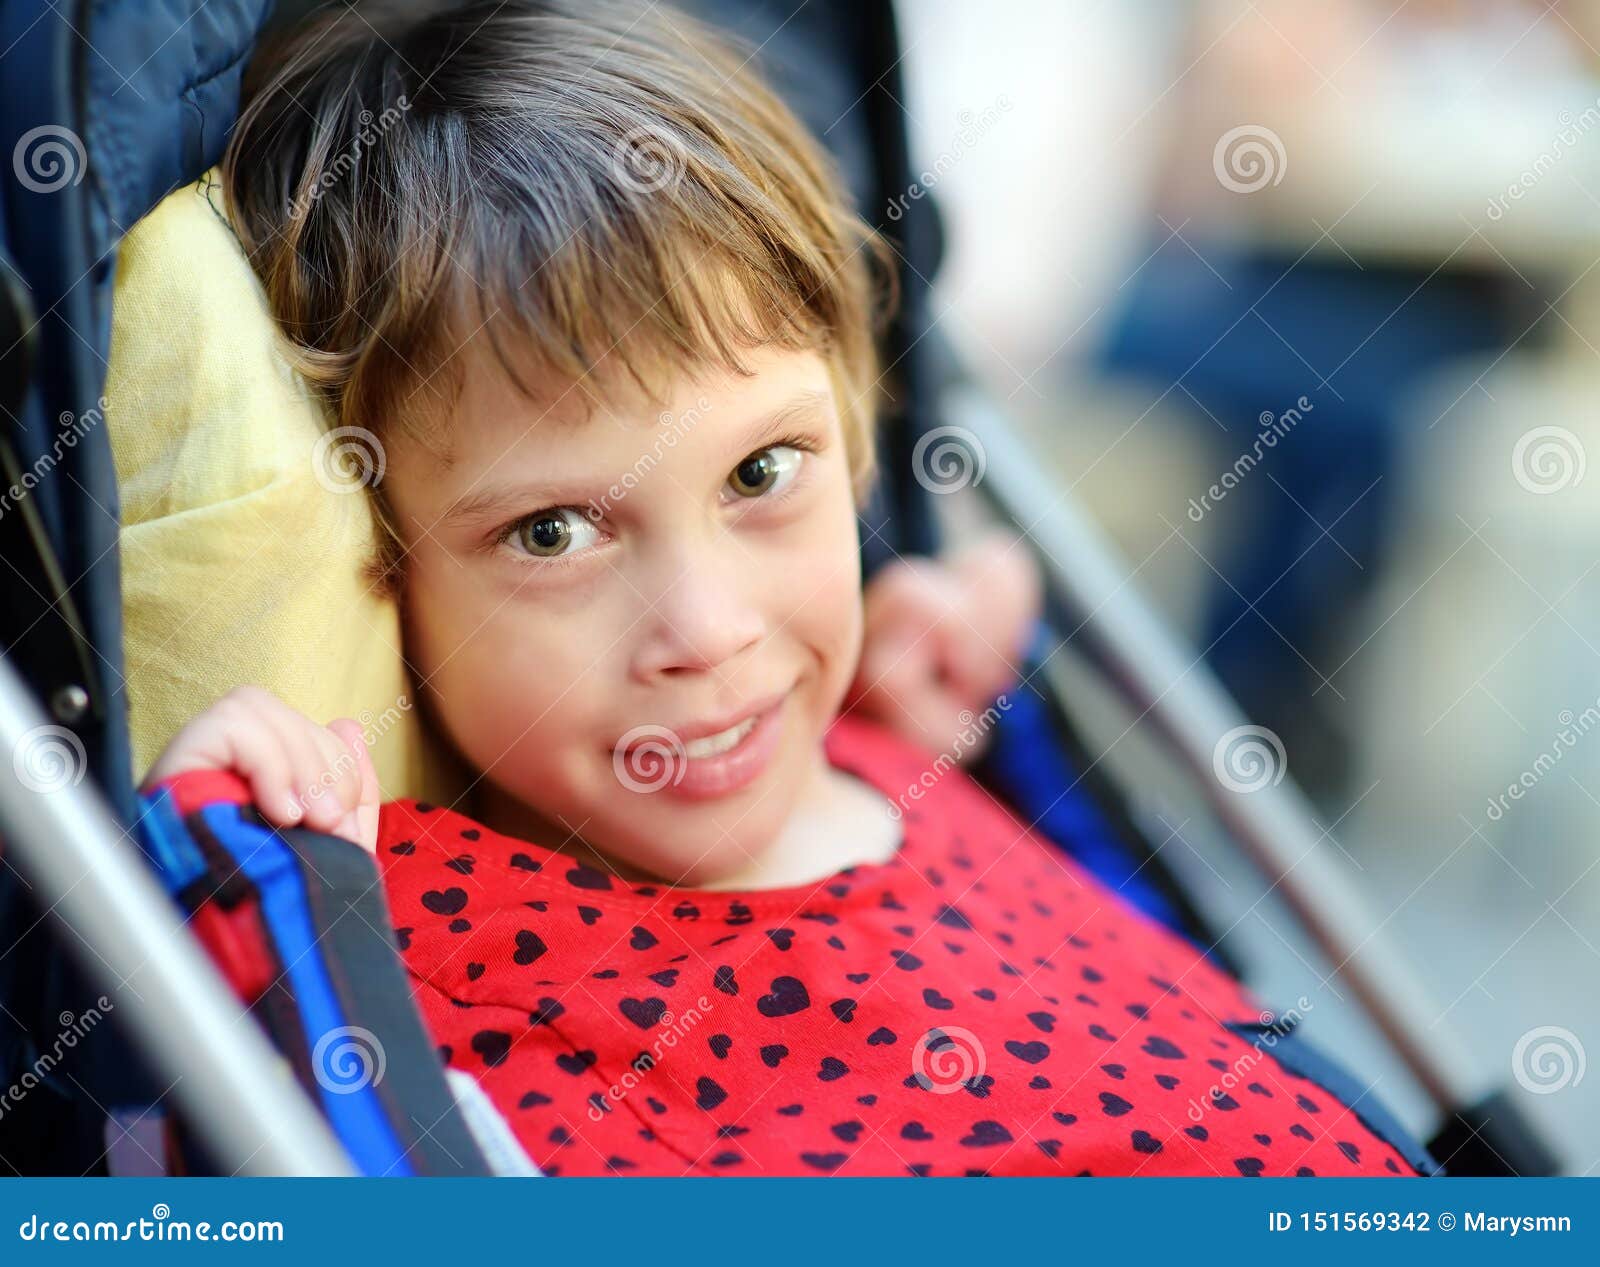 portrait of a cute little disabled girl in a wheelchair. child cerebral palsy. inclusion